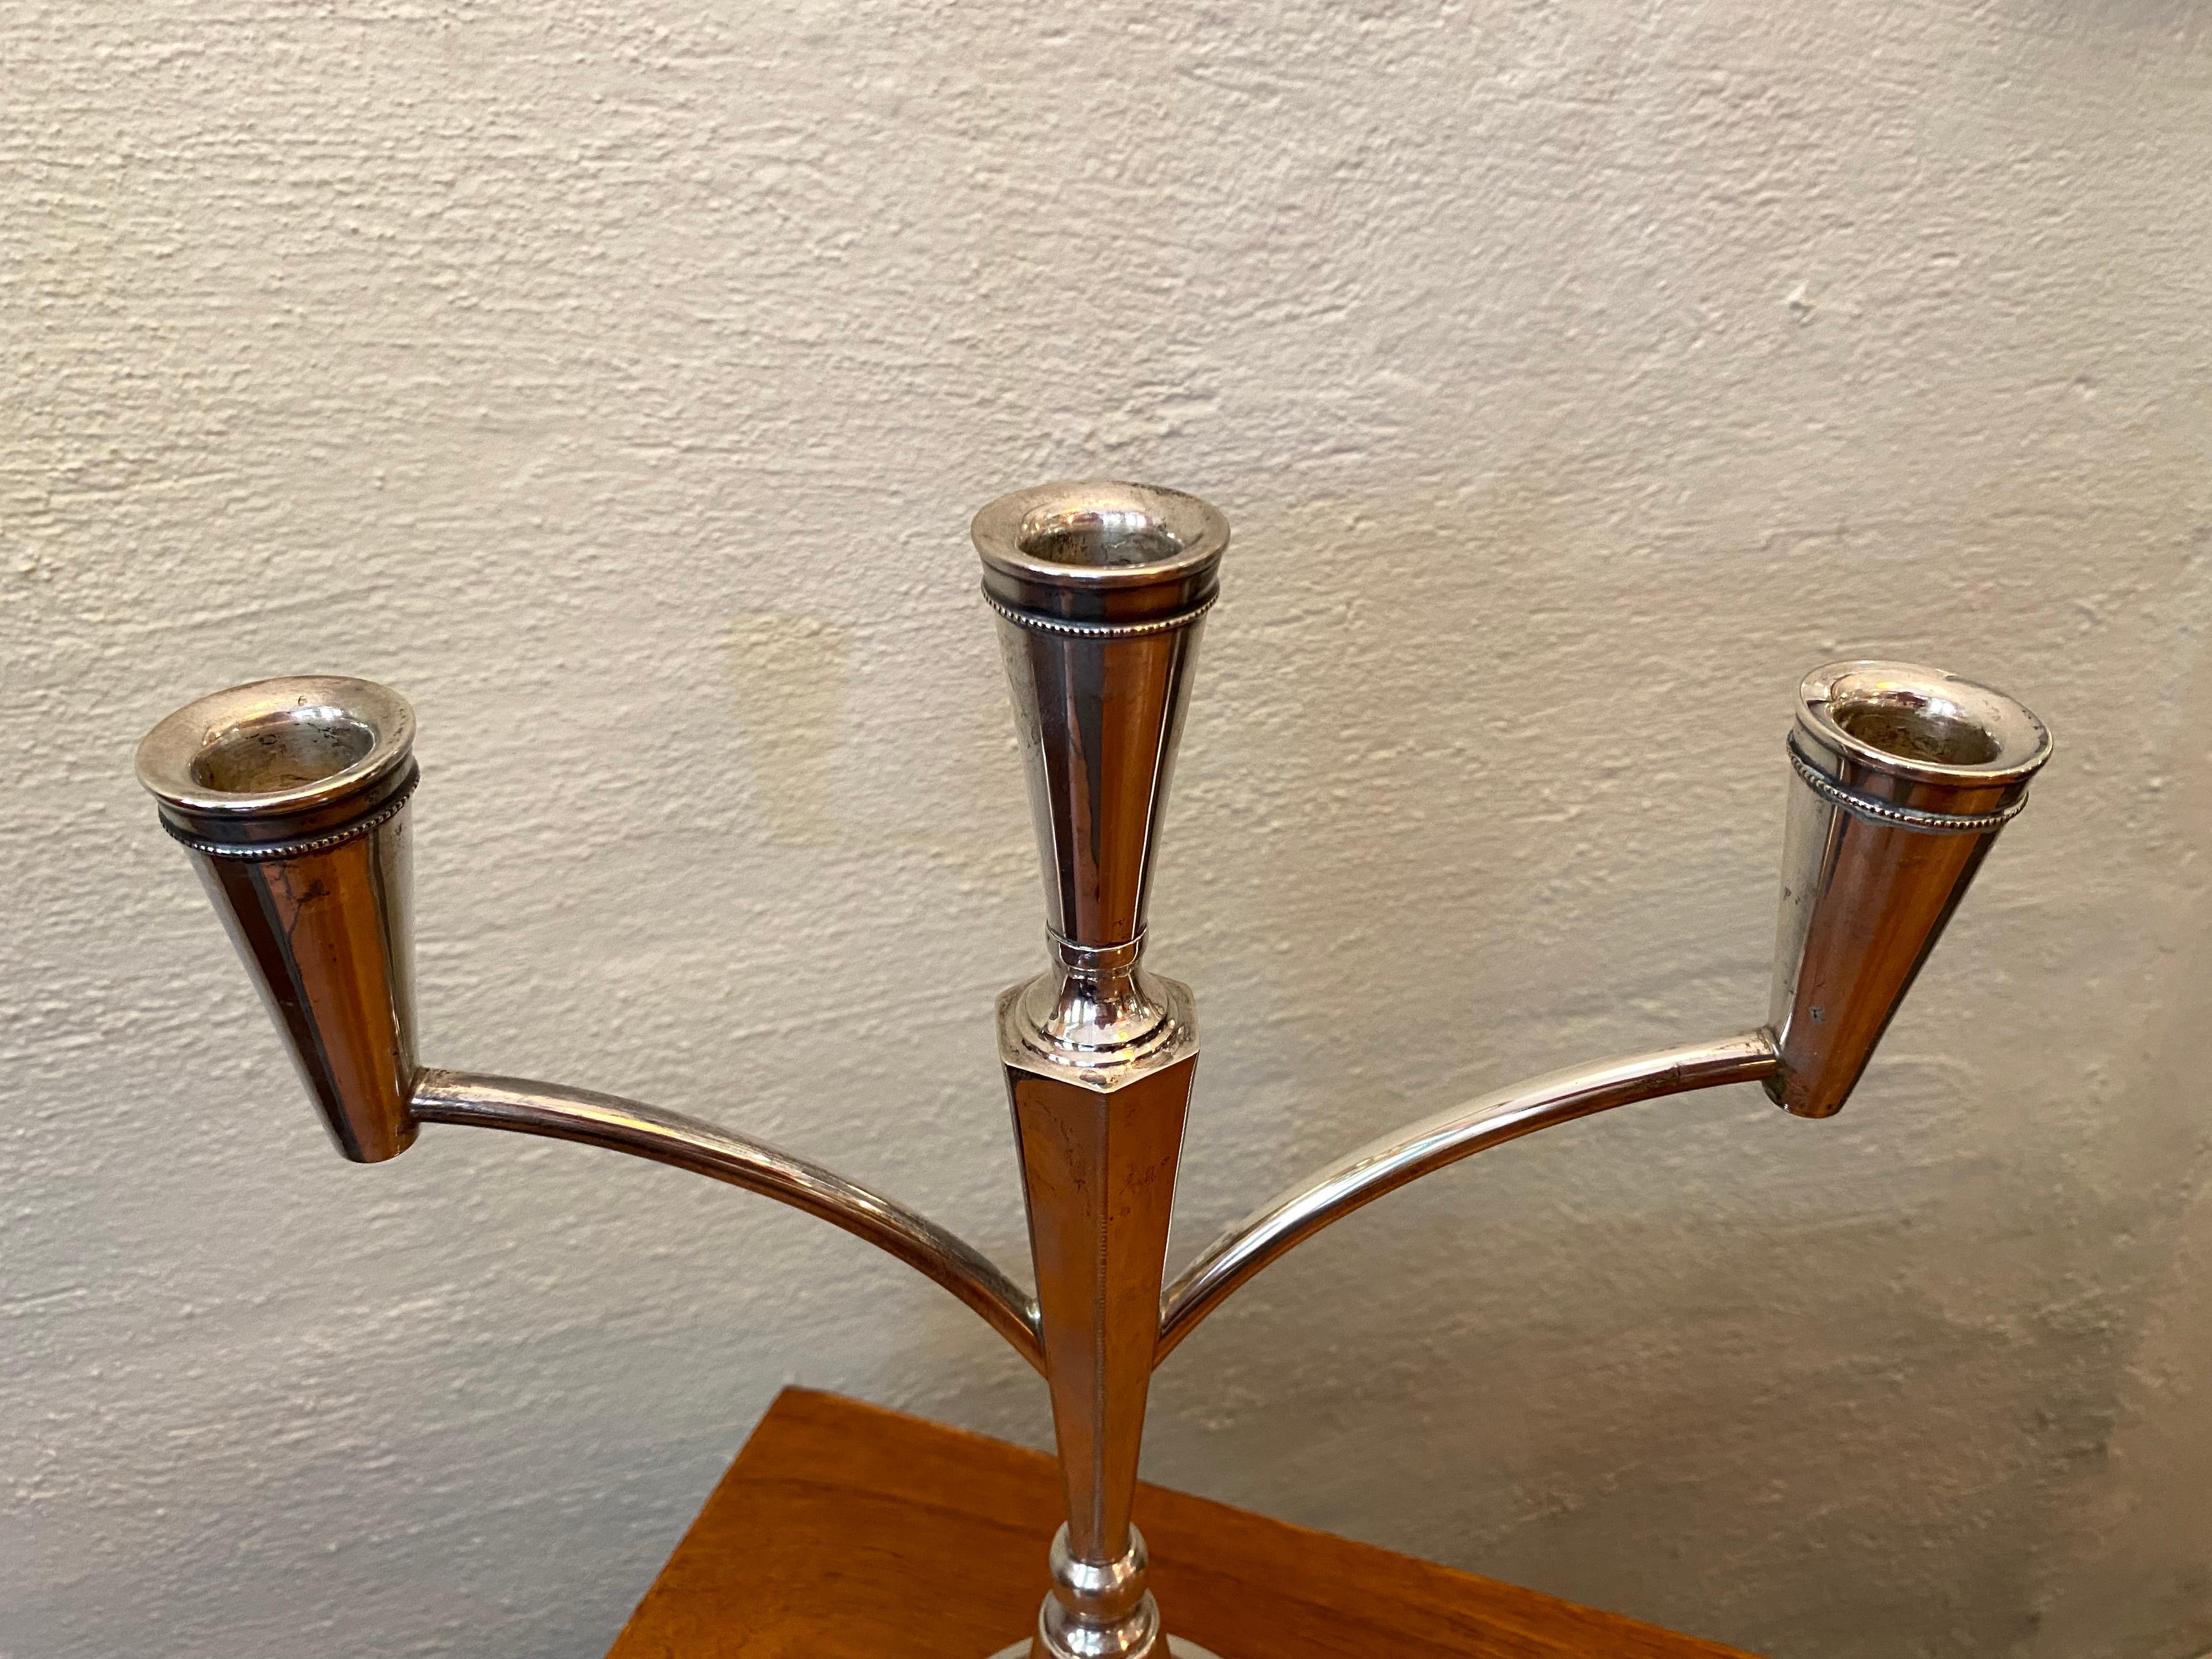 Sterling silver 3 arm candlabra. Very nice quality and design. Marked on rim of base.